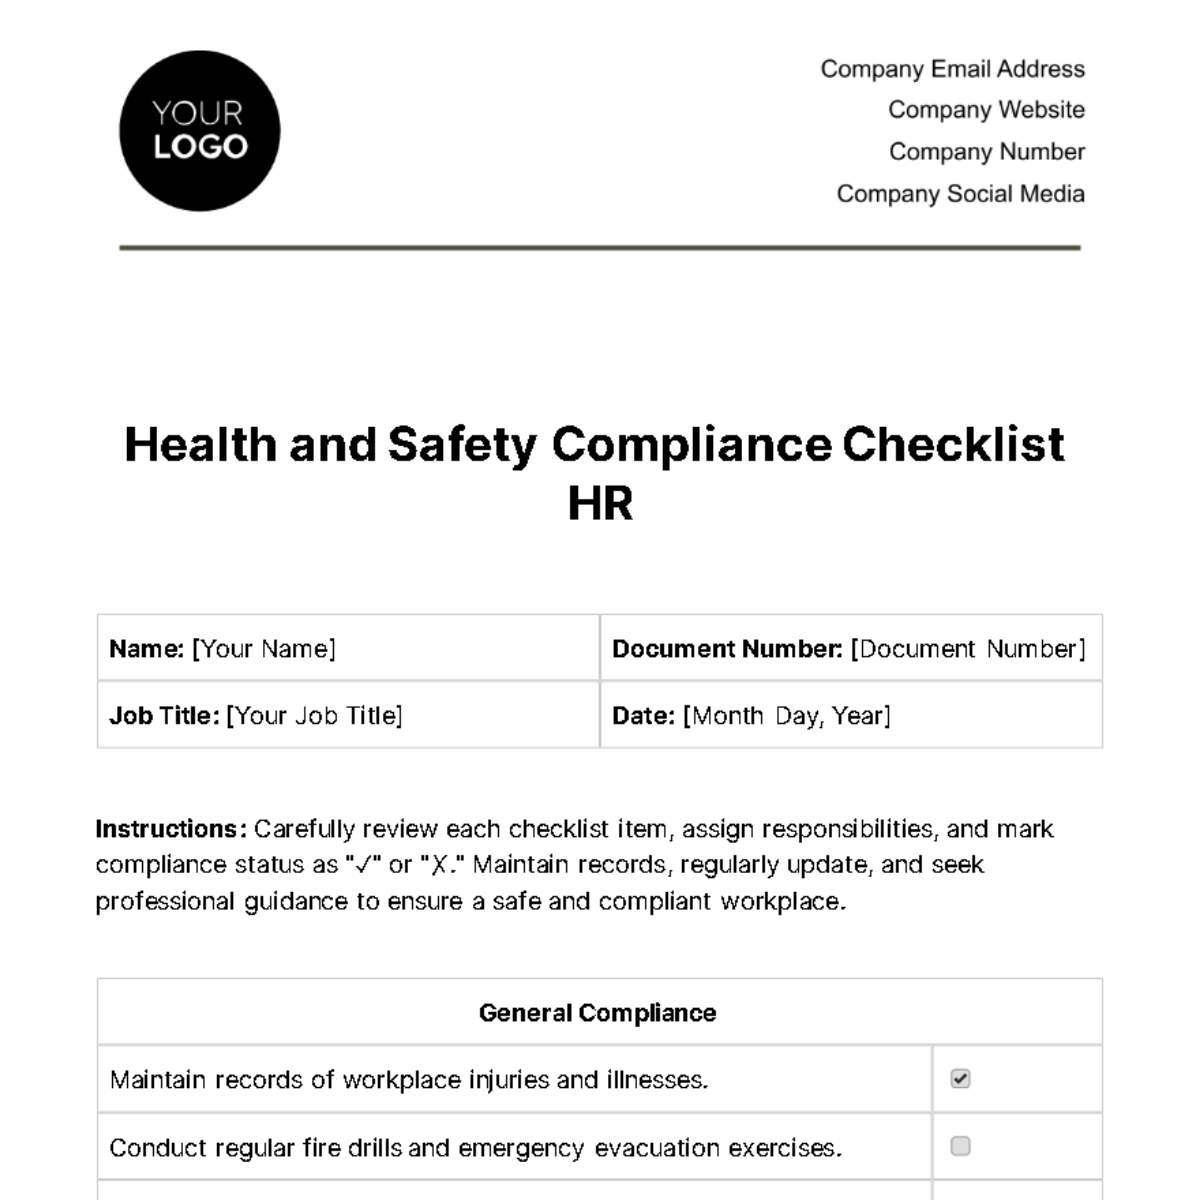 Health and Safety Compliance Checklist HR Template